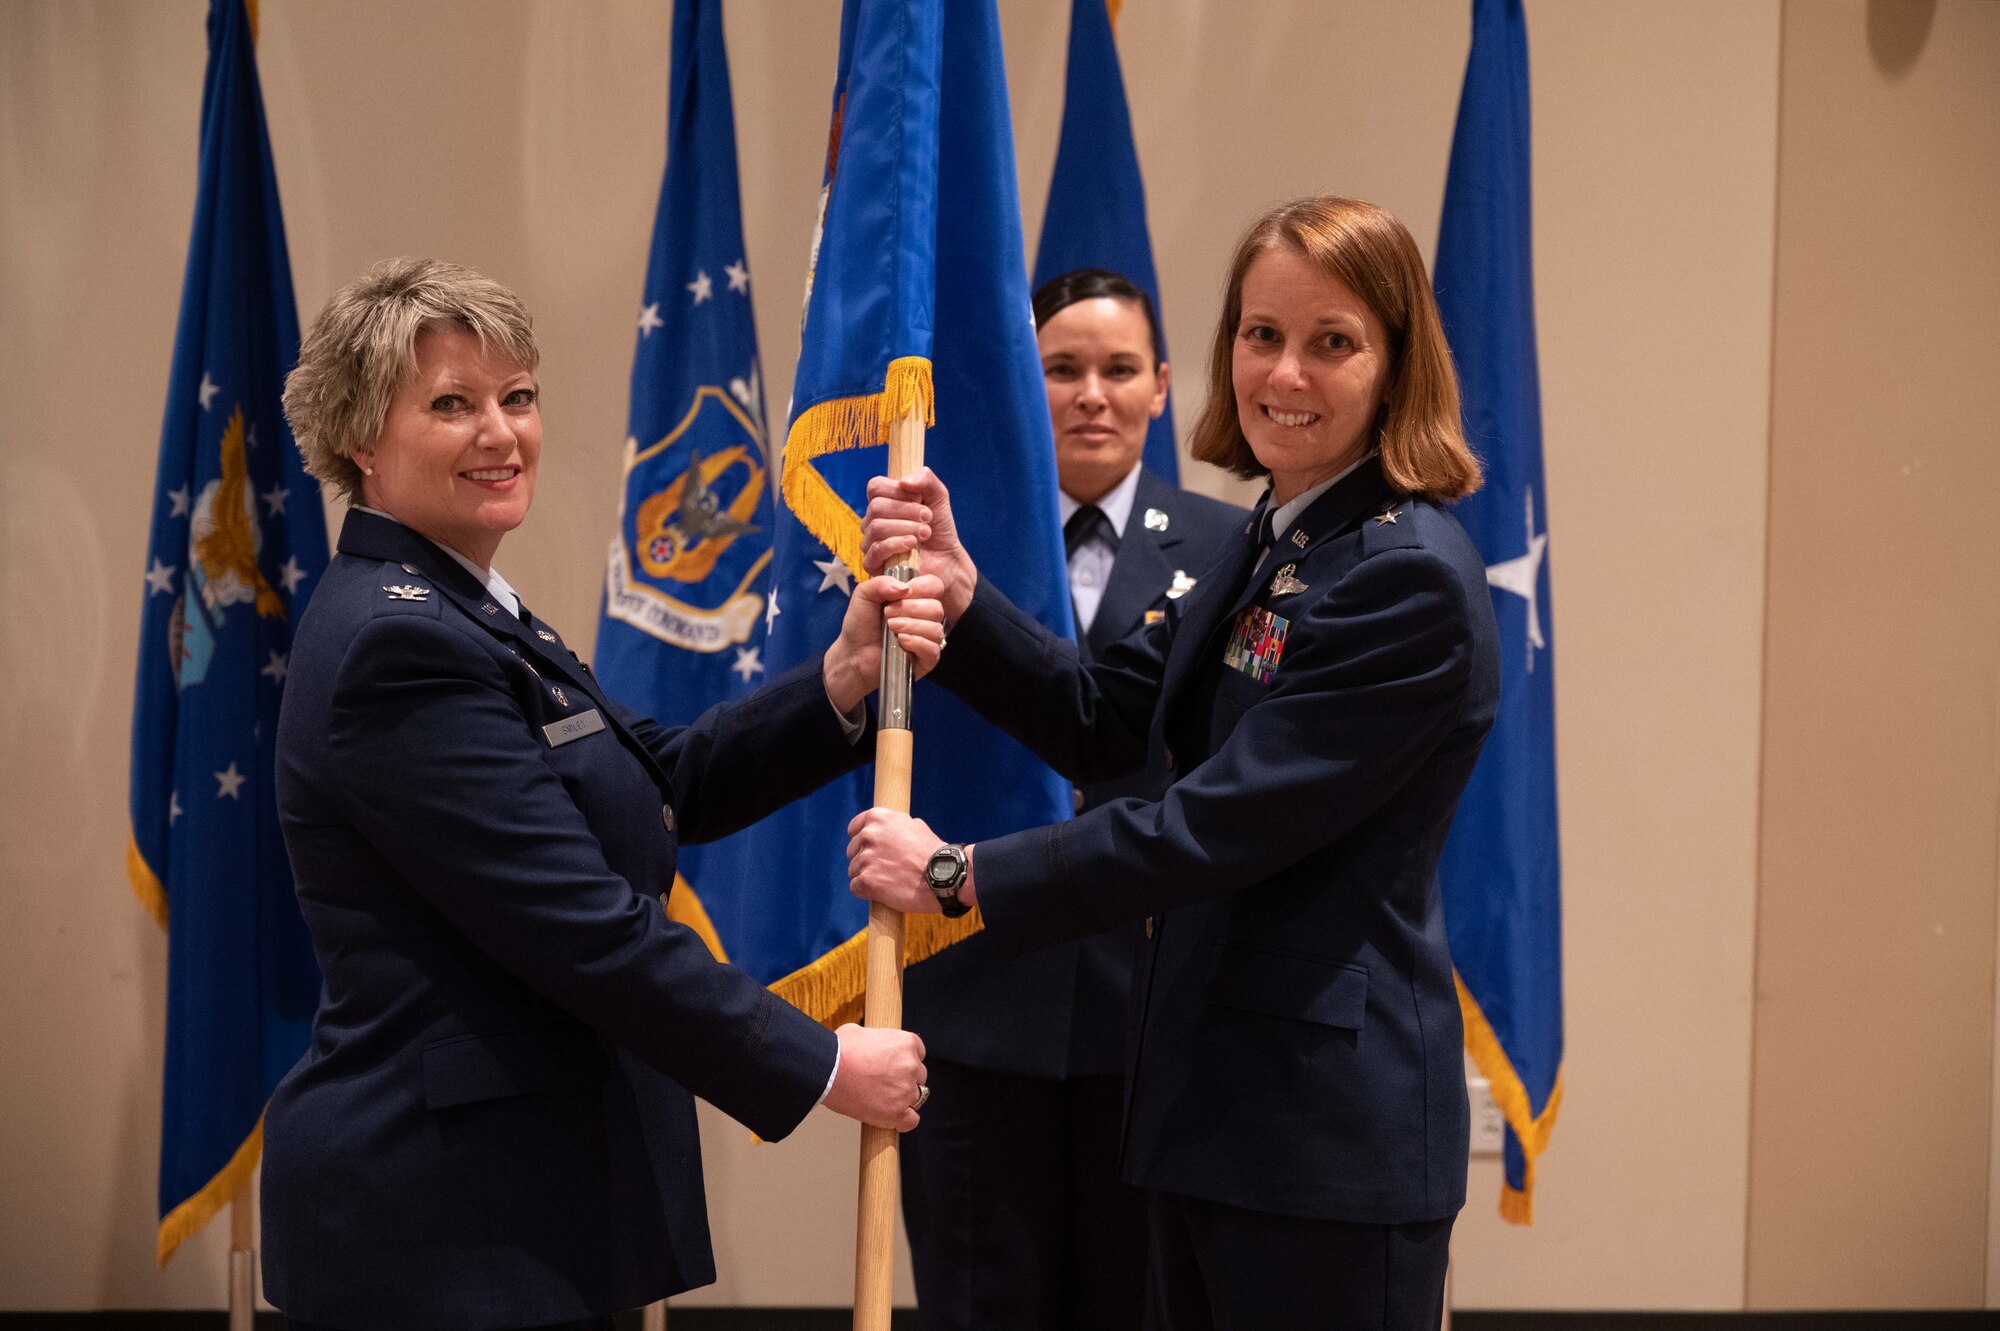 Col. Kelli Smiley relinquished command of Headquarters Air Reserve Personnel Center at Buckley Air Force Base, Colorado, to Brig. Gen. Jennie Johnson  May 21, 2021.